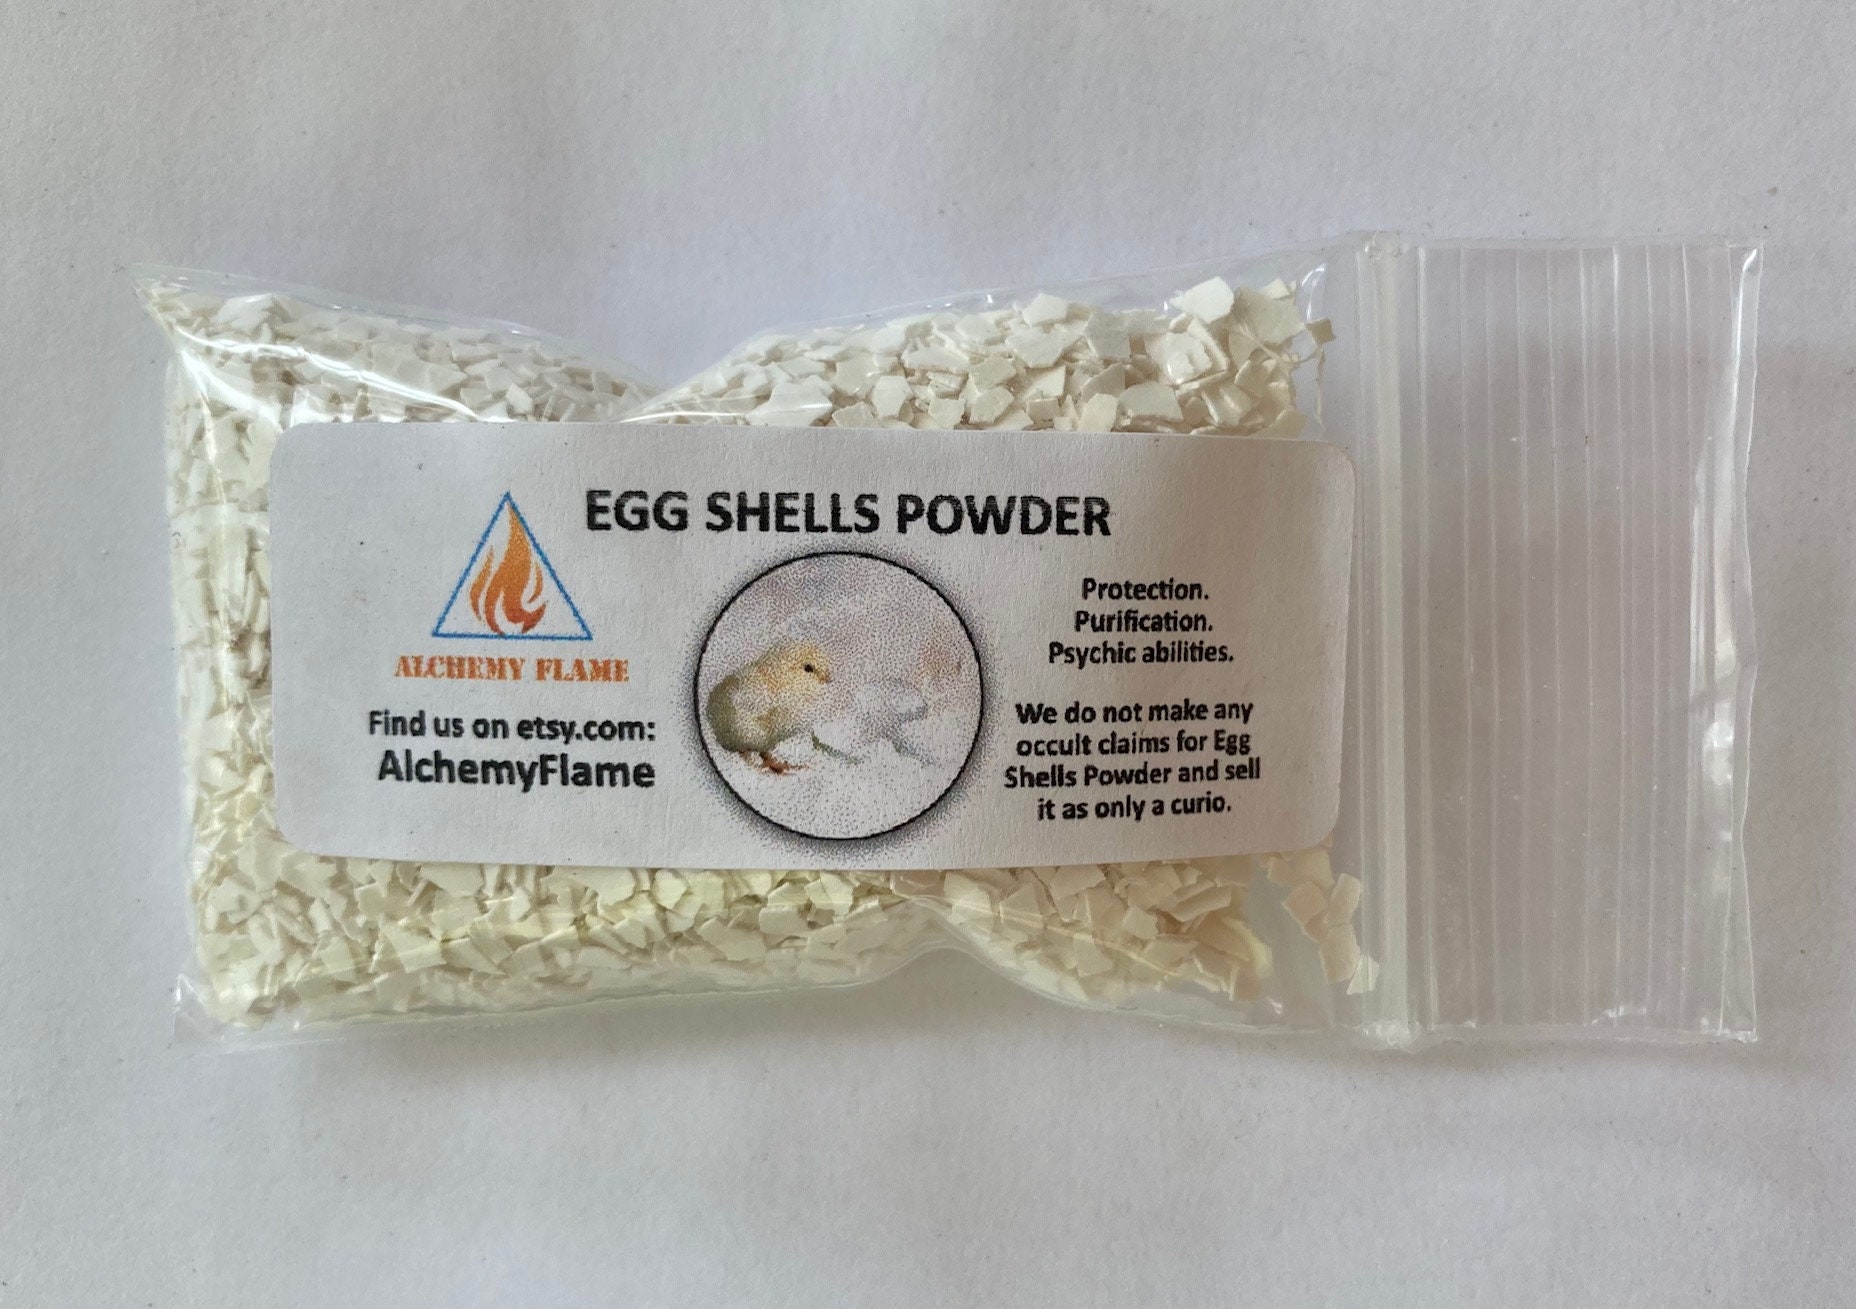 Cascarilla (Eggshell Powder): Protection and Cleansing – EVERYTHiNG SOULFuL